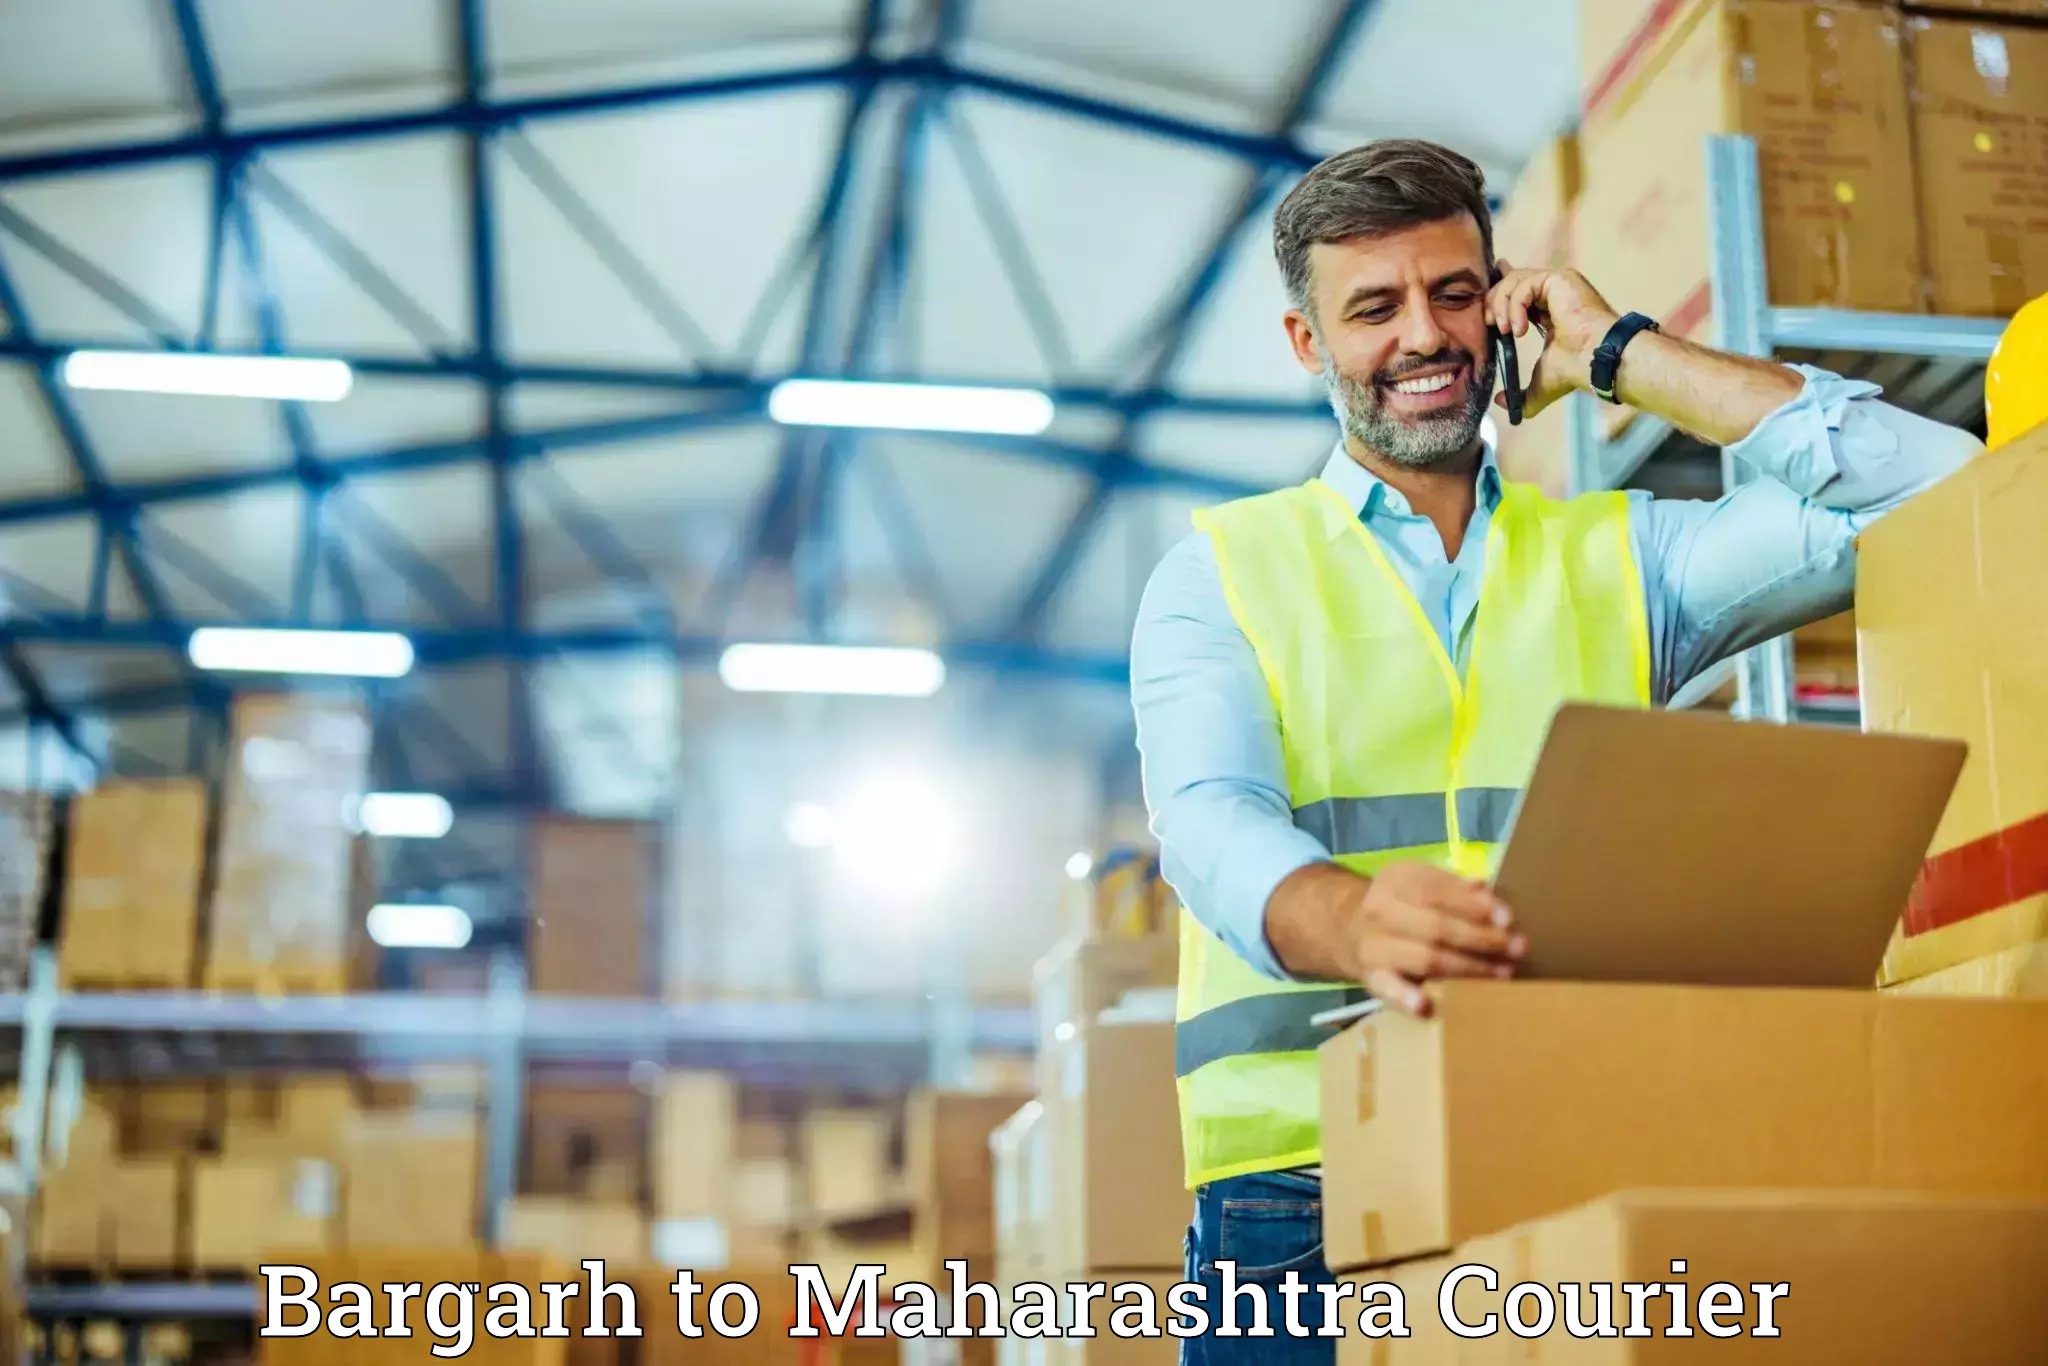 Quality relocation assistance Bargarh to Vasai